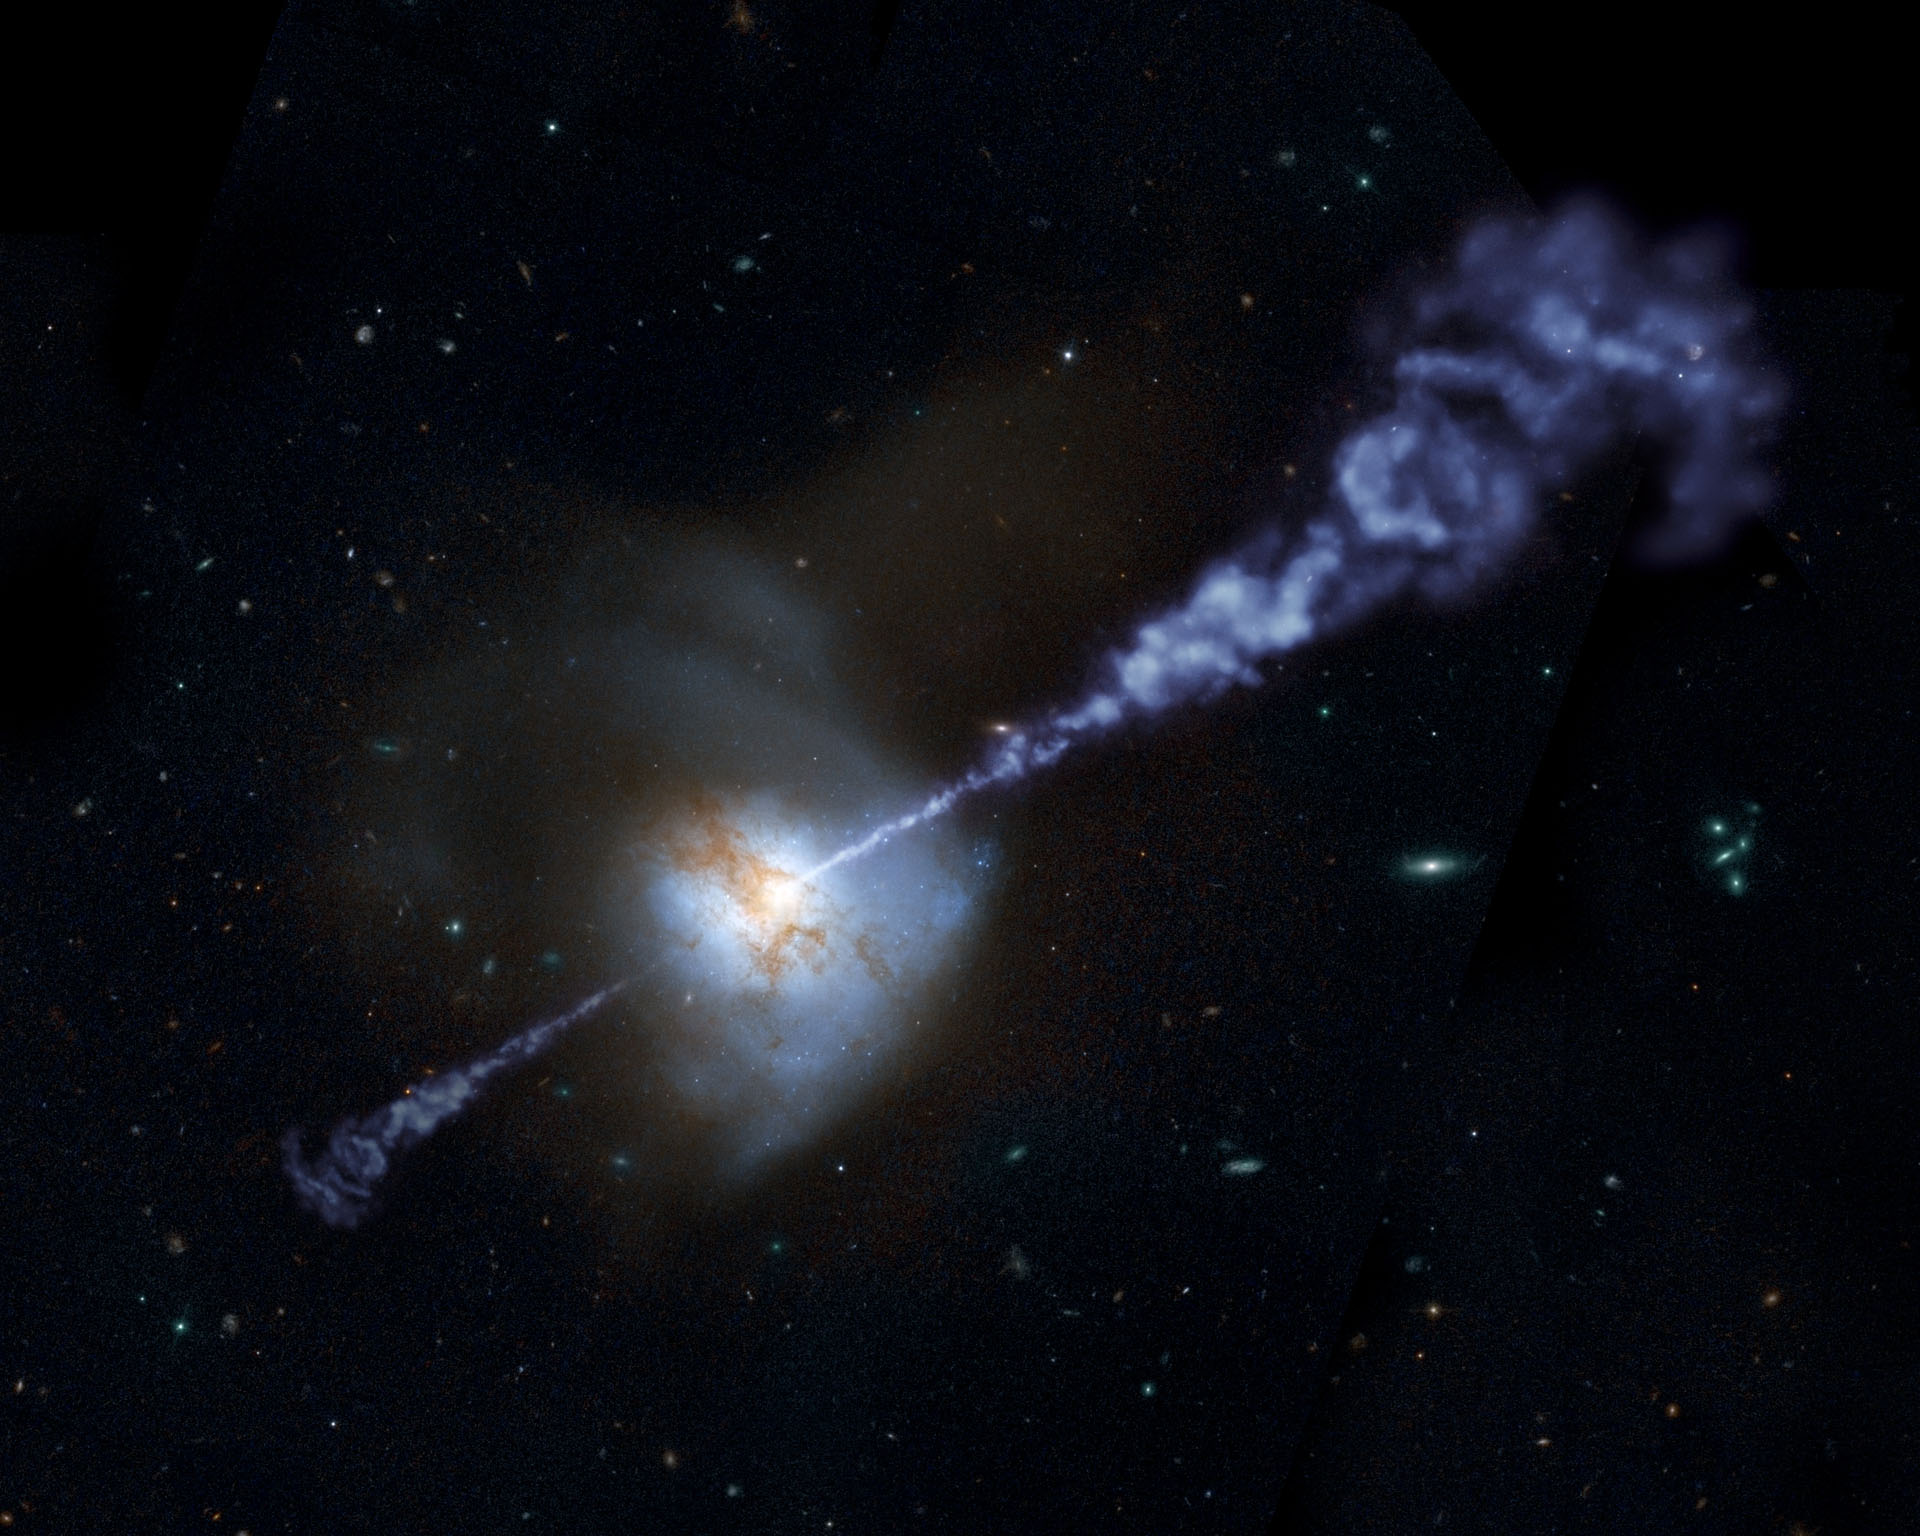 Artist's impression of galactic outflows. Copyright: NASA/JPL-Caltech/R. Hurt